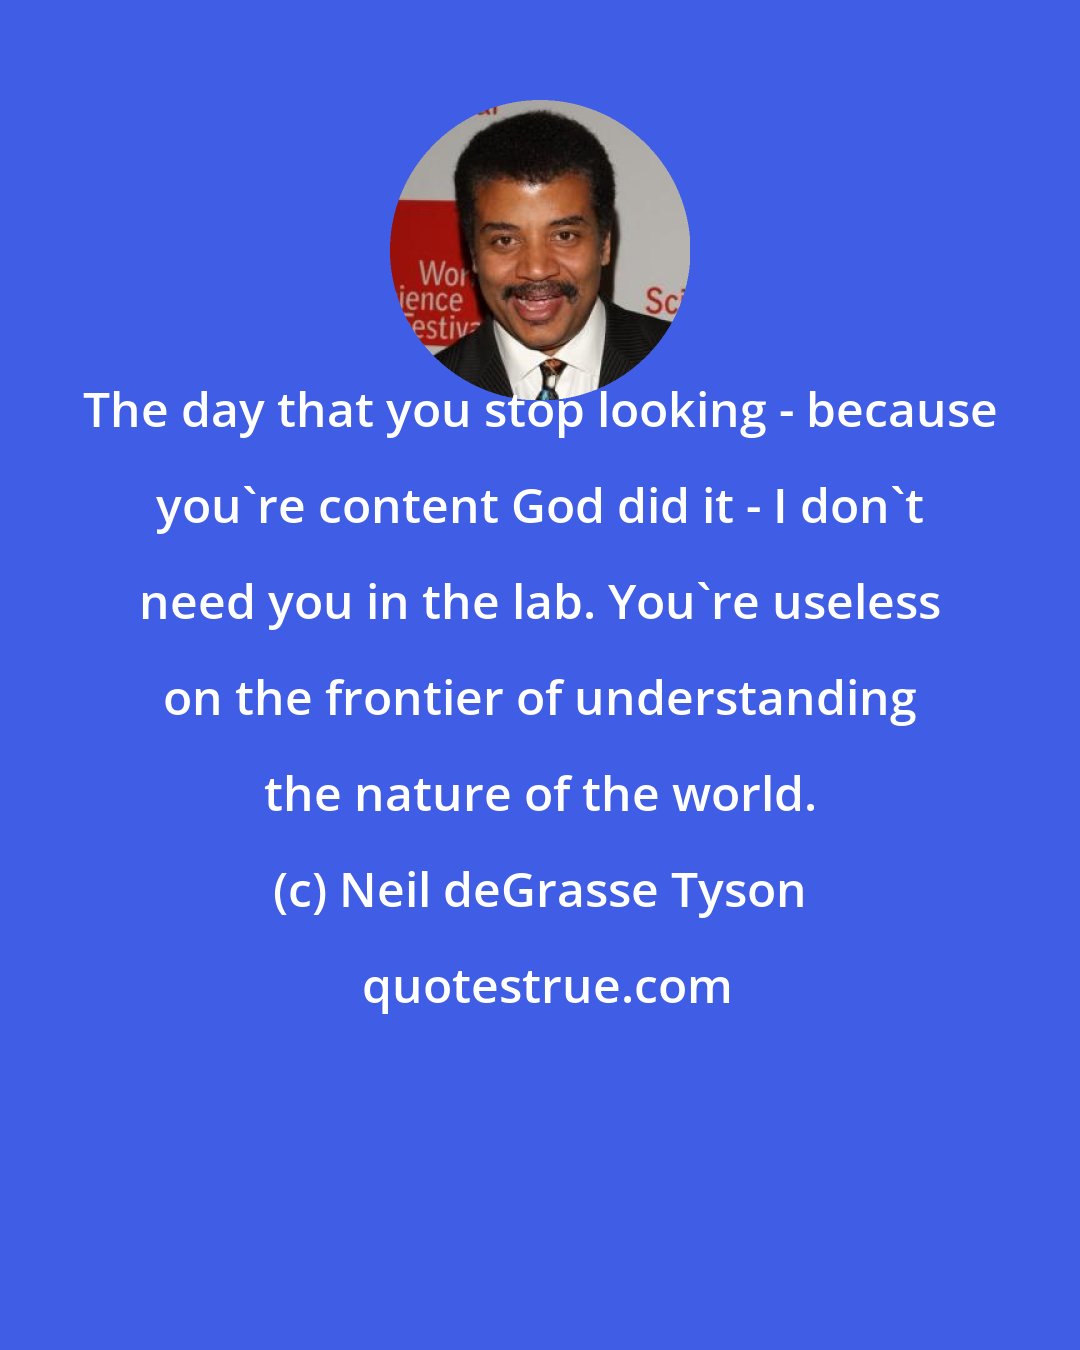 Neil deGrasse Tyson: The day that you stop looking - because you're content God did it - I don't need you in the lab. You're useless on the frontier of understanding the nature of the world.